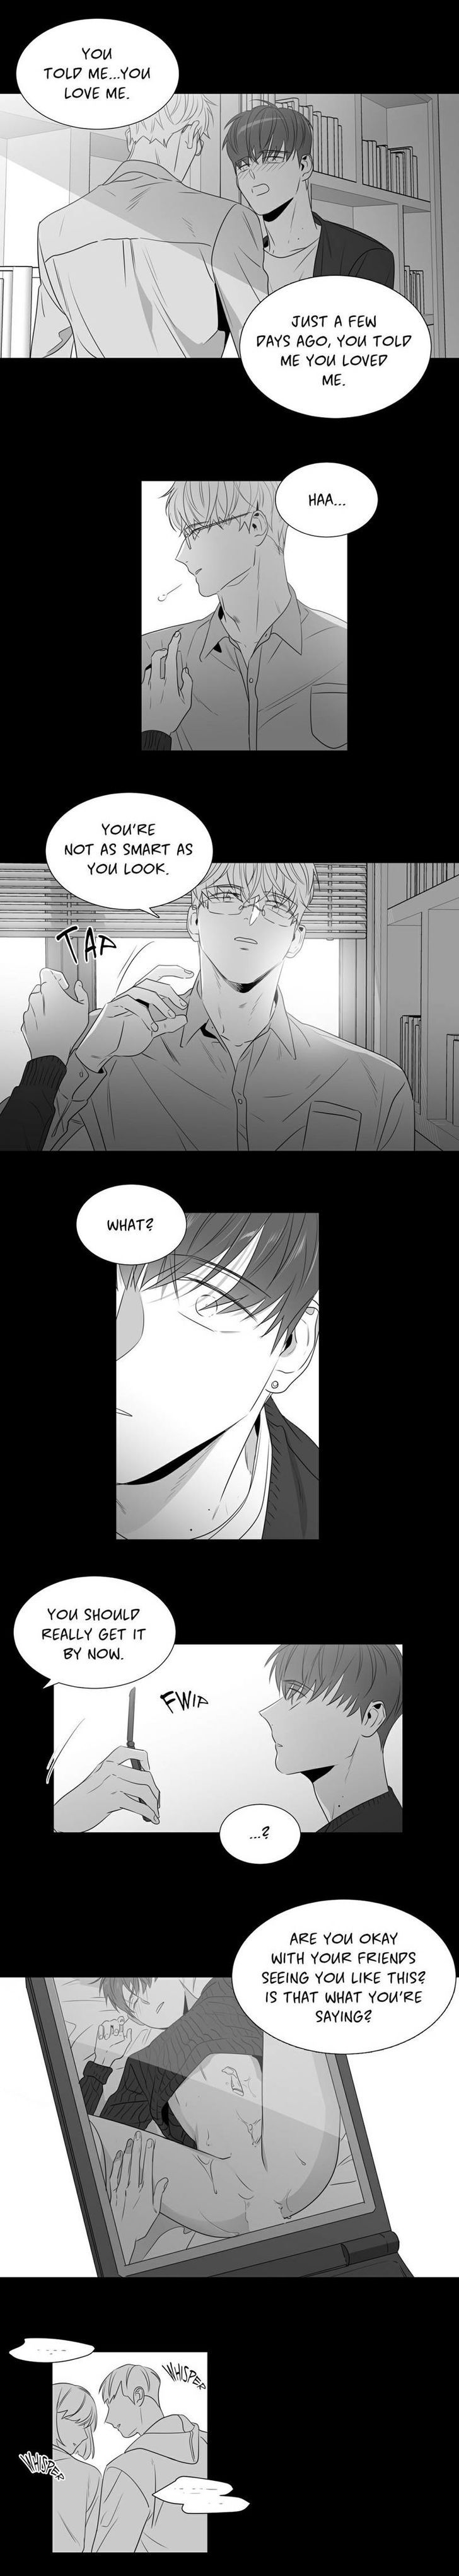 Lover Boy (Lezhin) Chapter 047.2 page 7